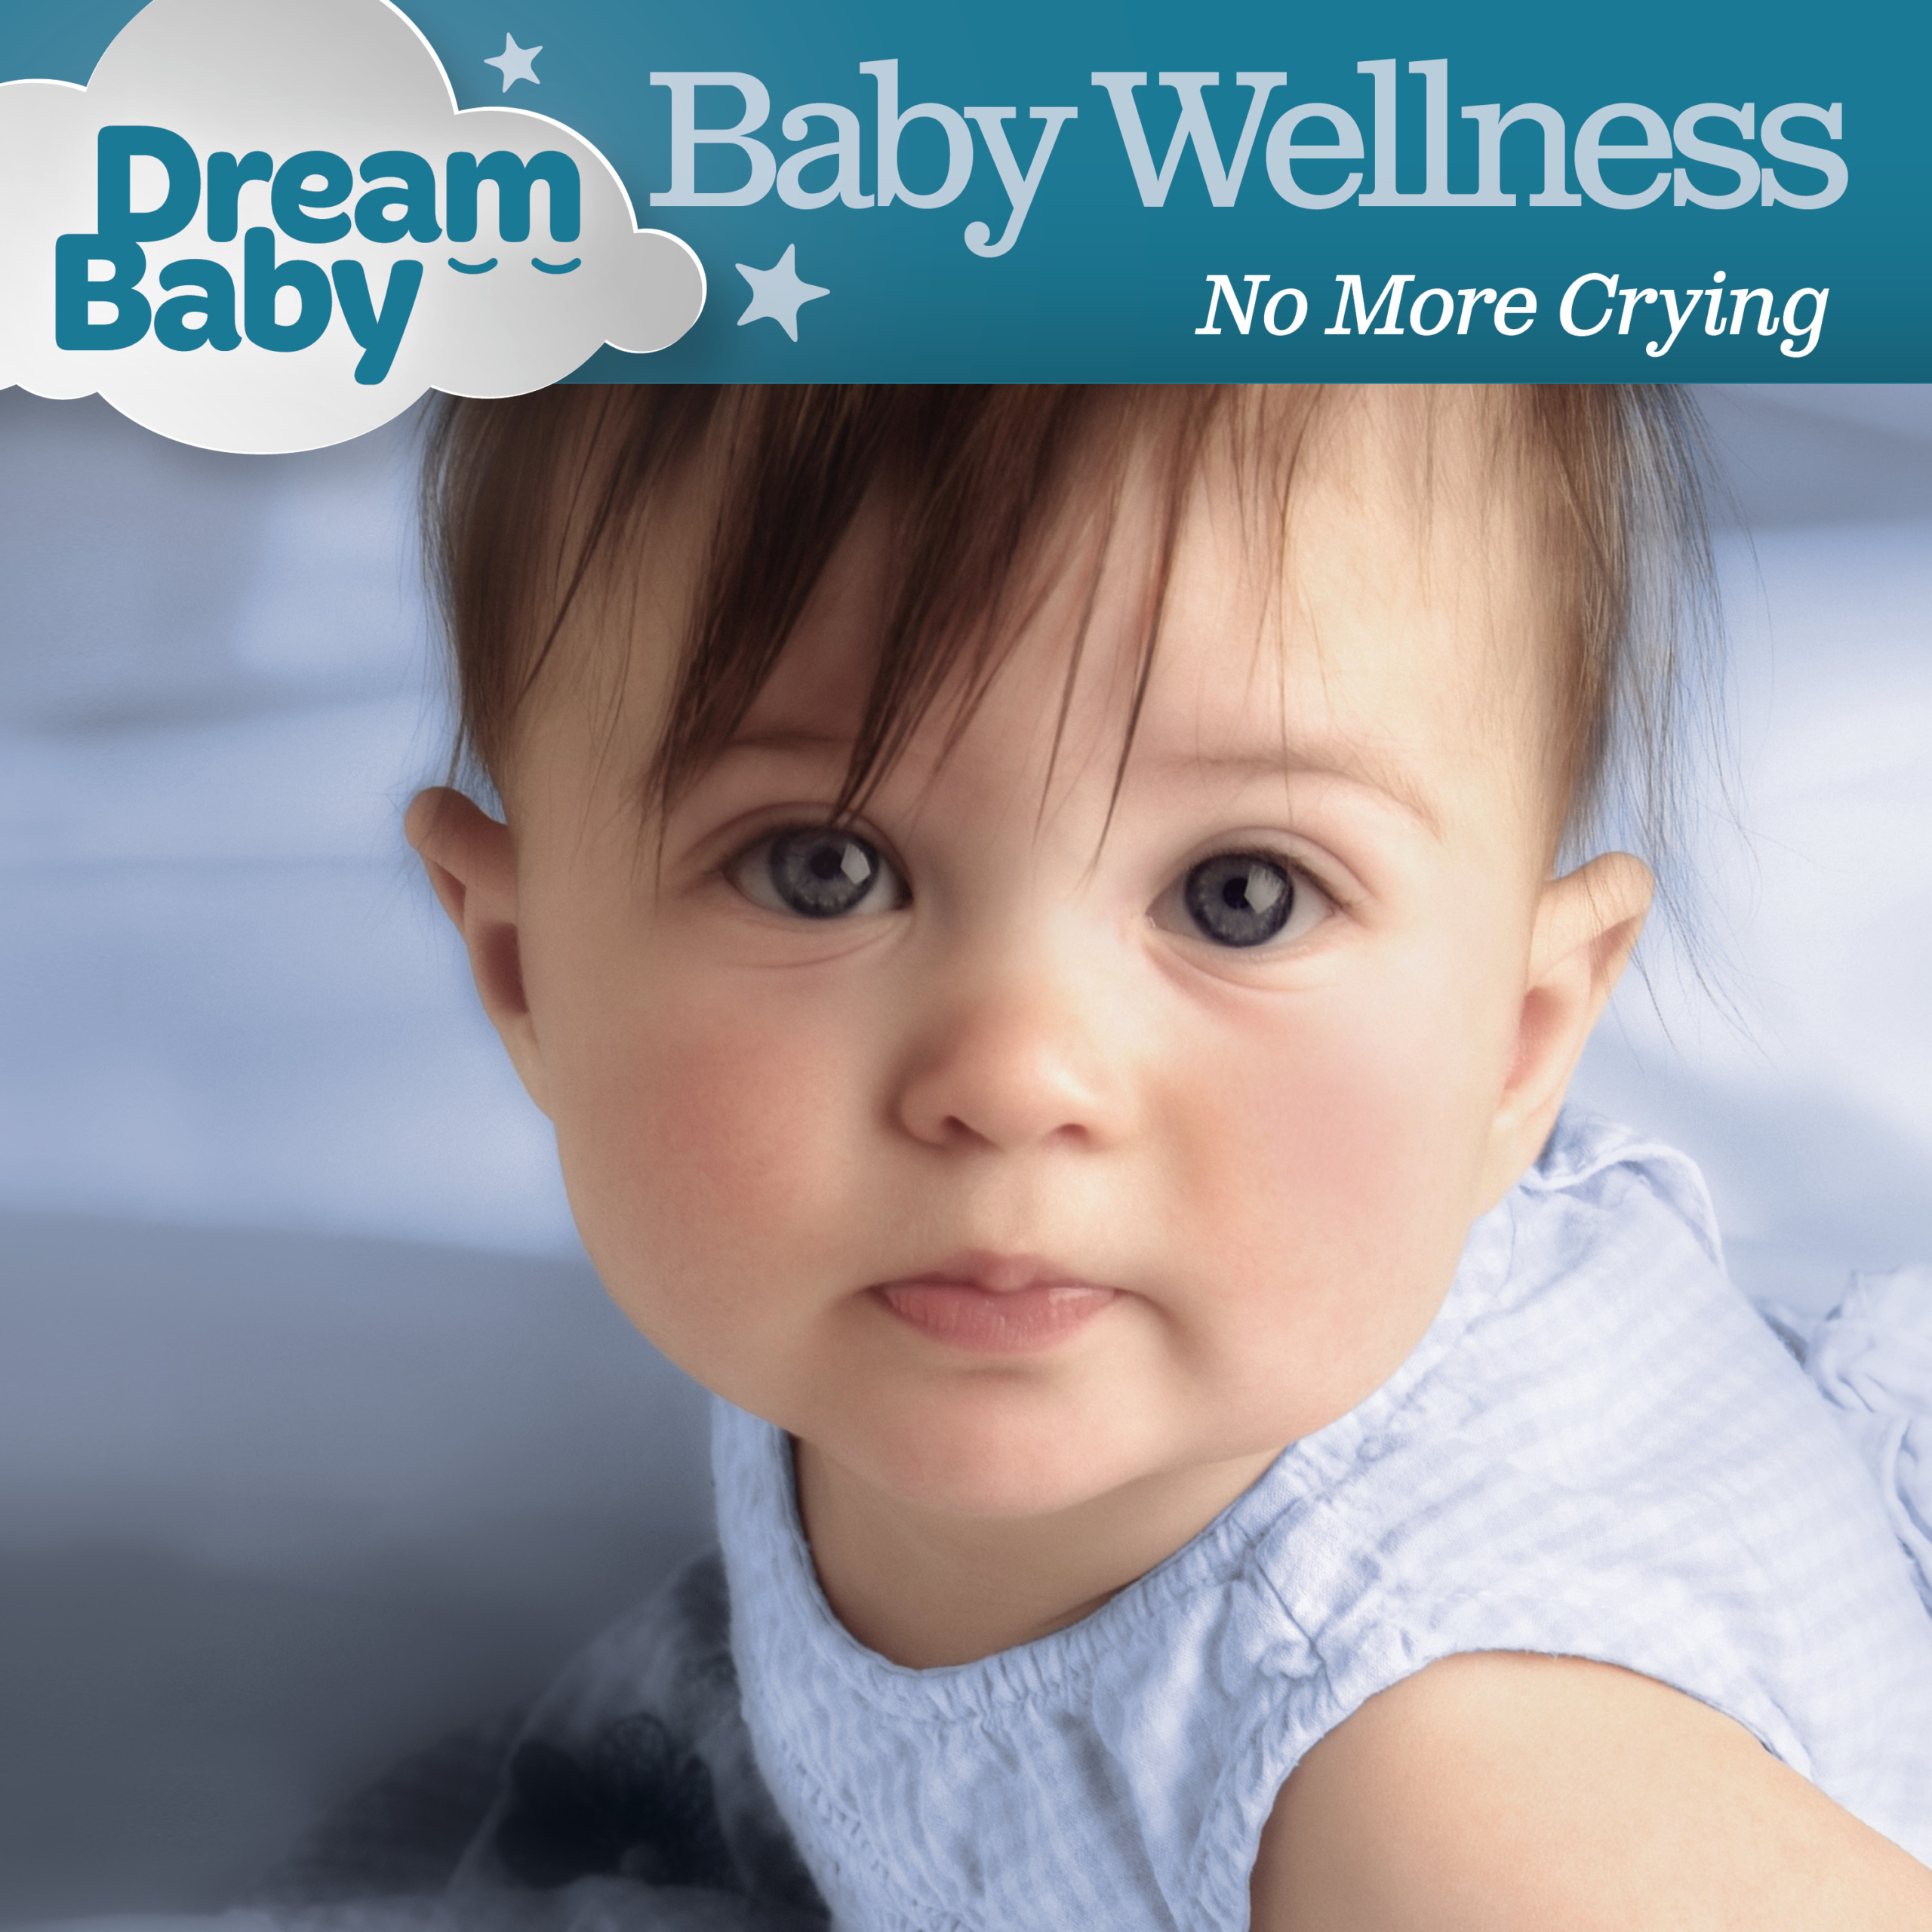 Baby Wellness: No More Crying